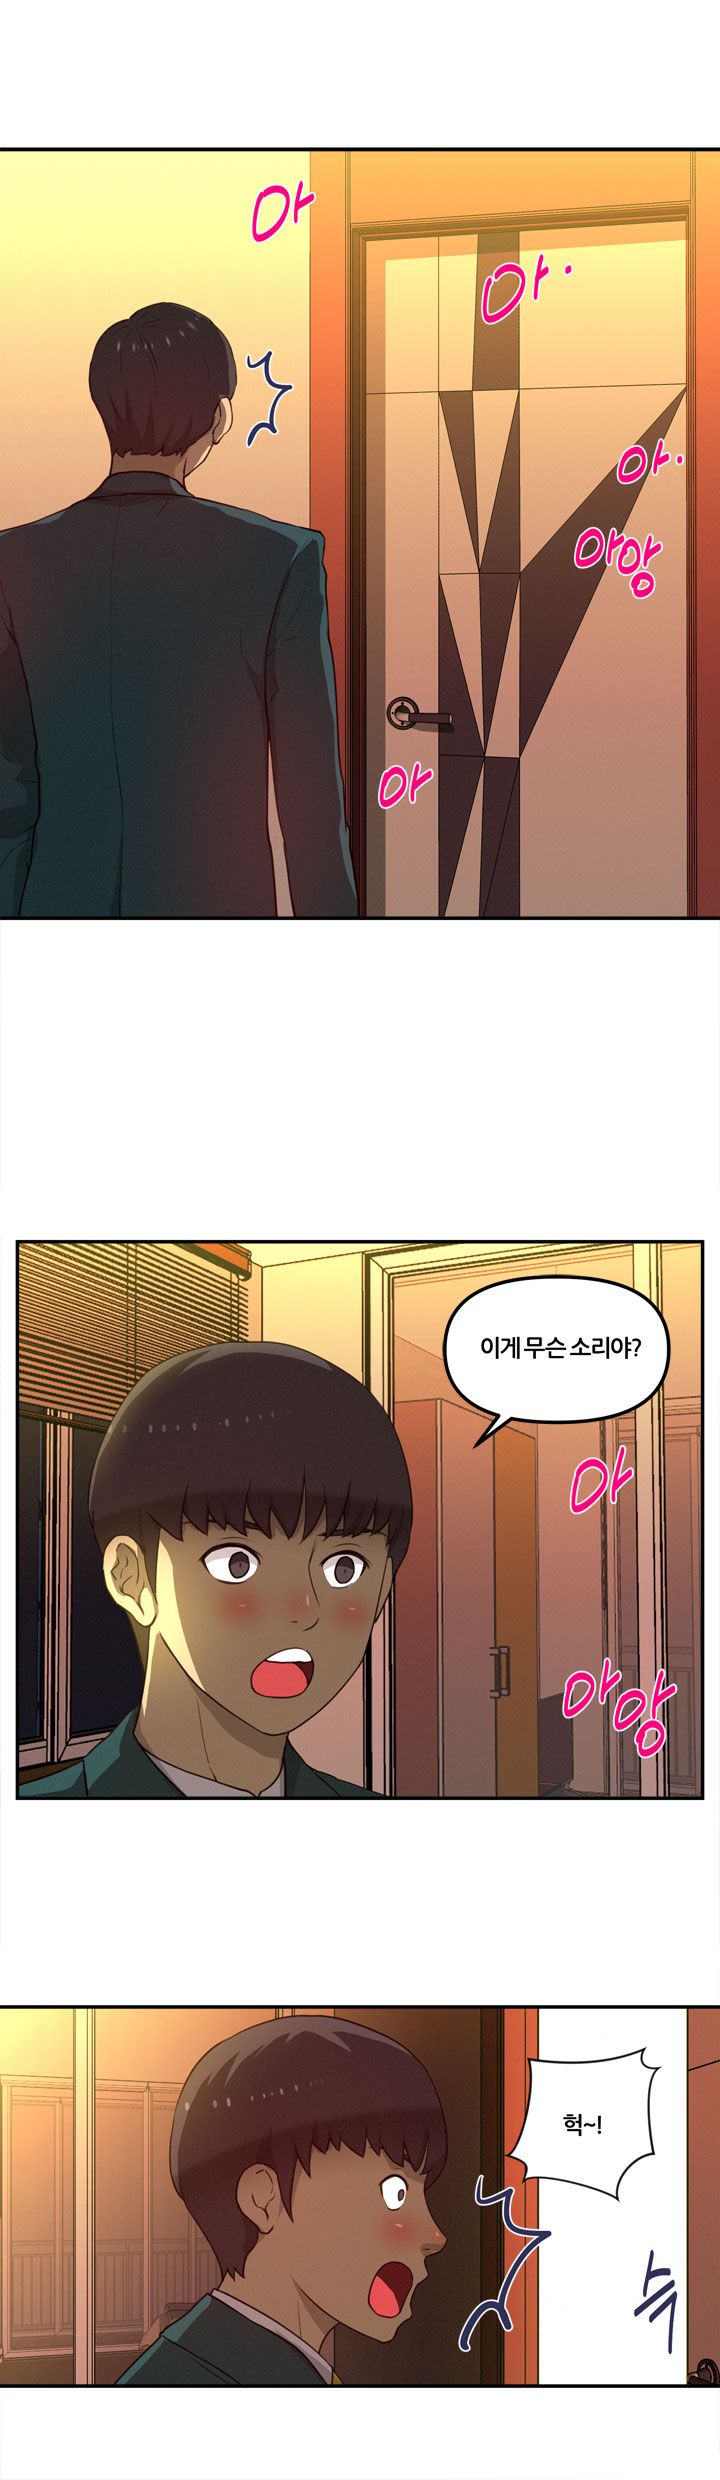 Her Vlog Raw - Chapter 17 Page 15